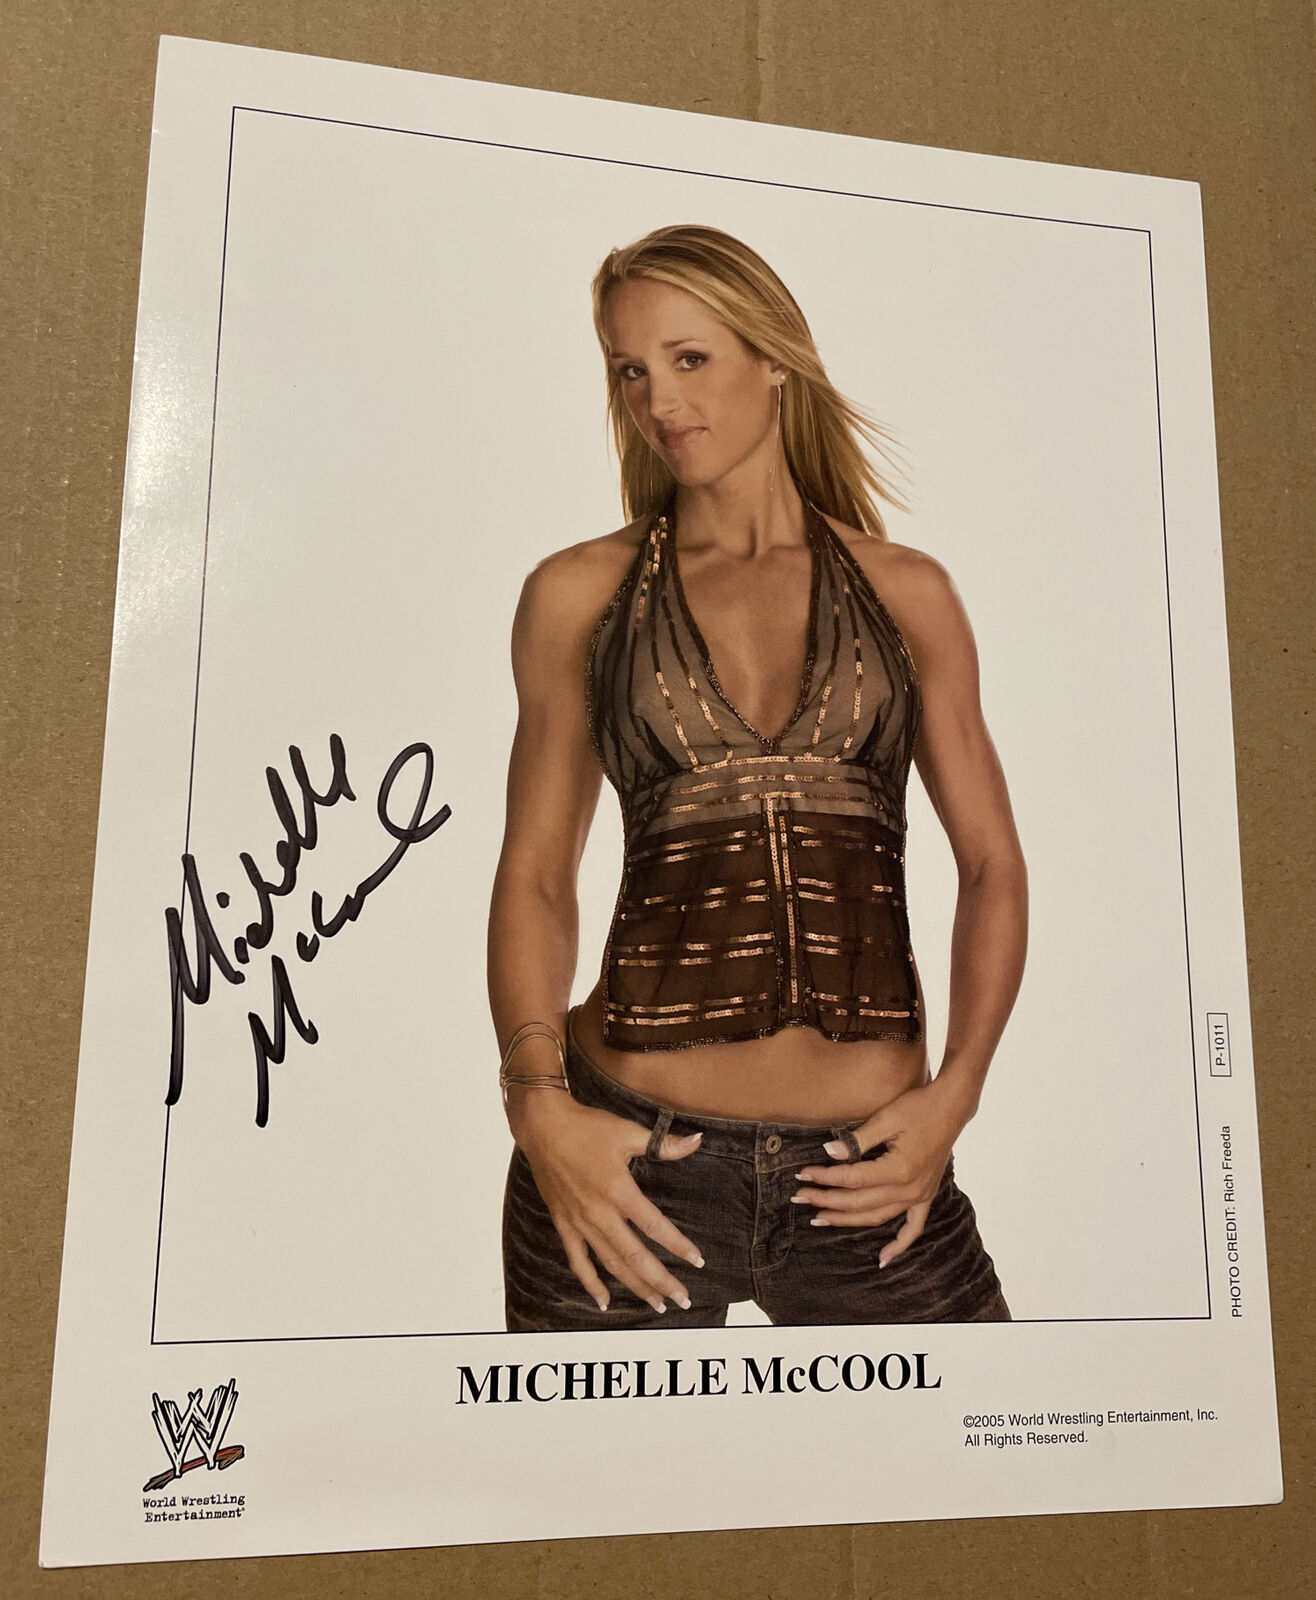 WWE MICHELLE MCCOOL P-1011 HAND SIGNED AUTOGRAPH 8X10 PROMO Photo Poster painting Wrestling Diva